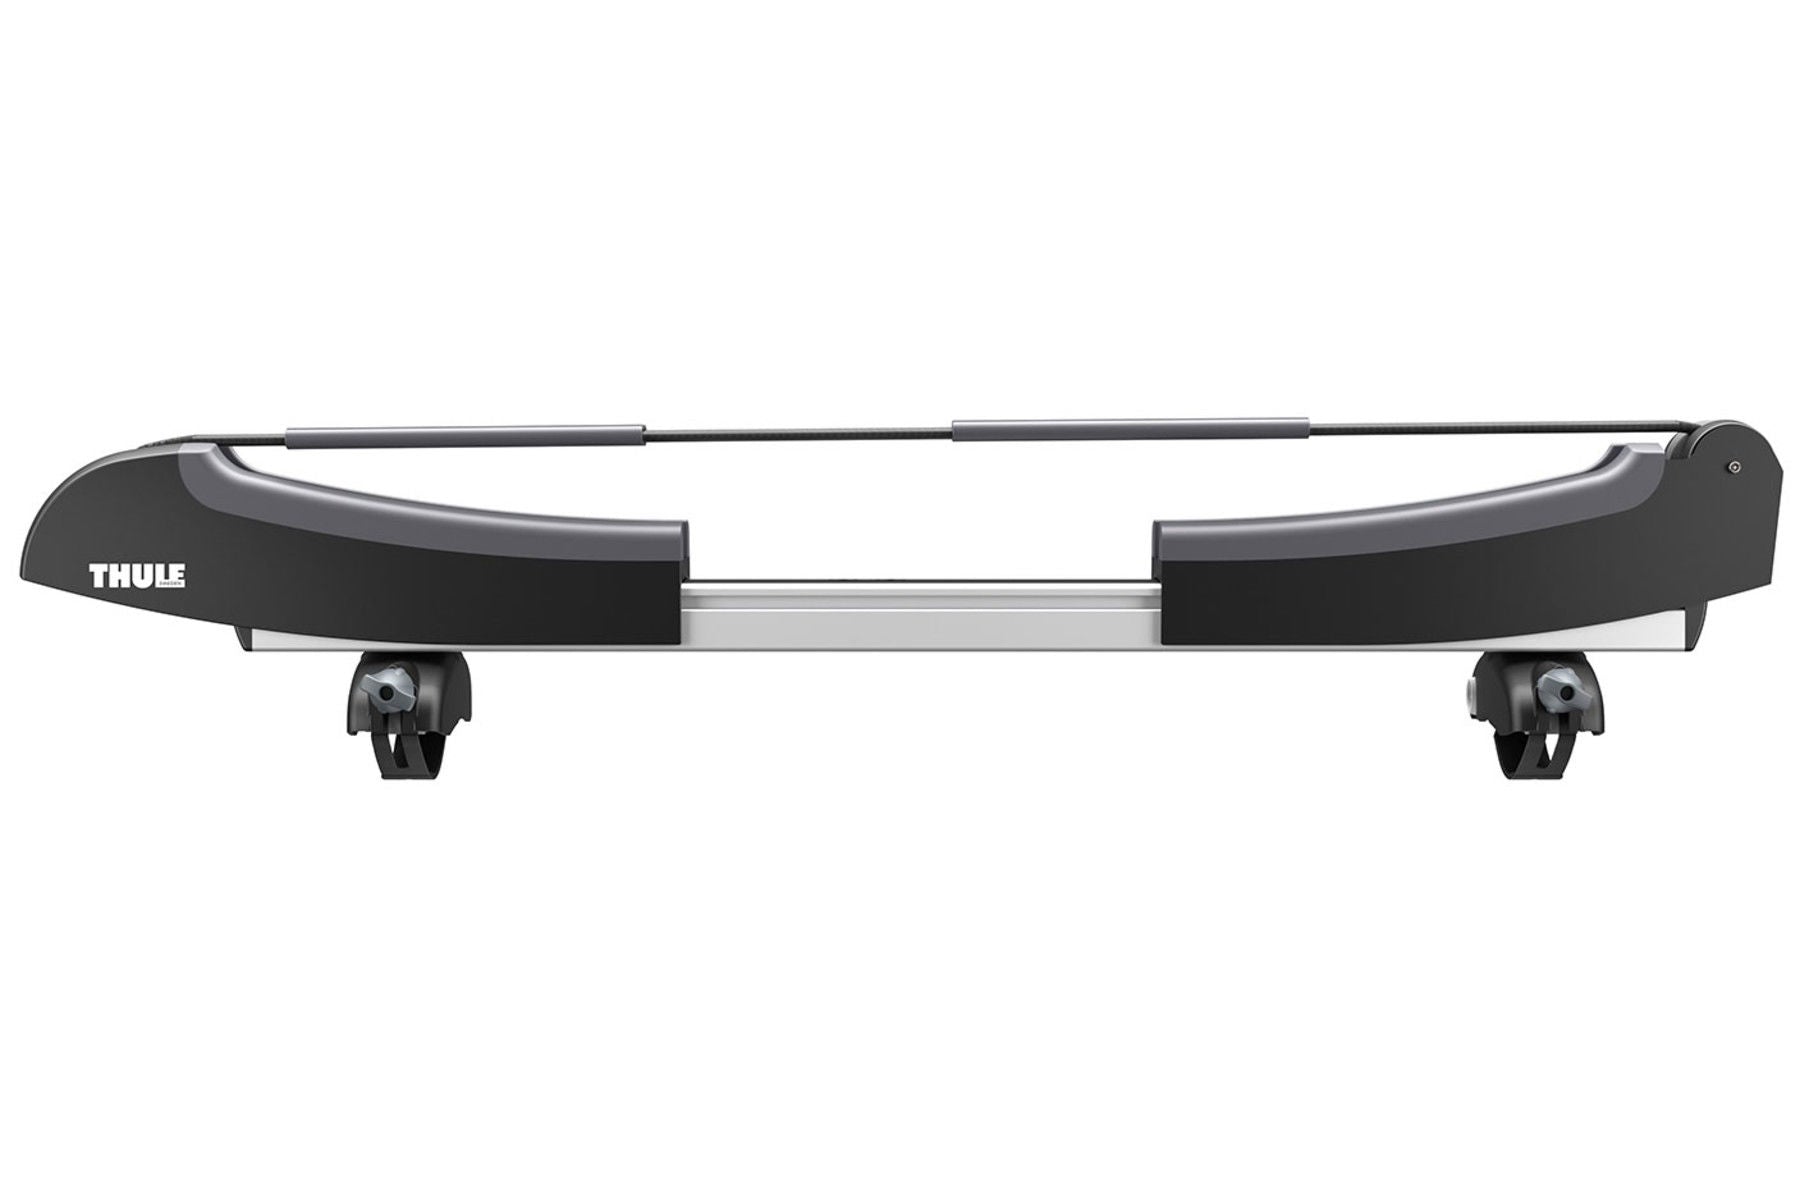 Thule 810001 - SUP Taxi XT Roof Rack